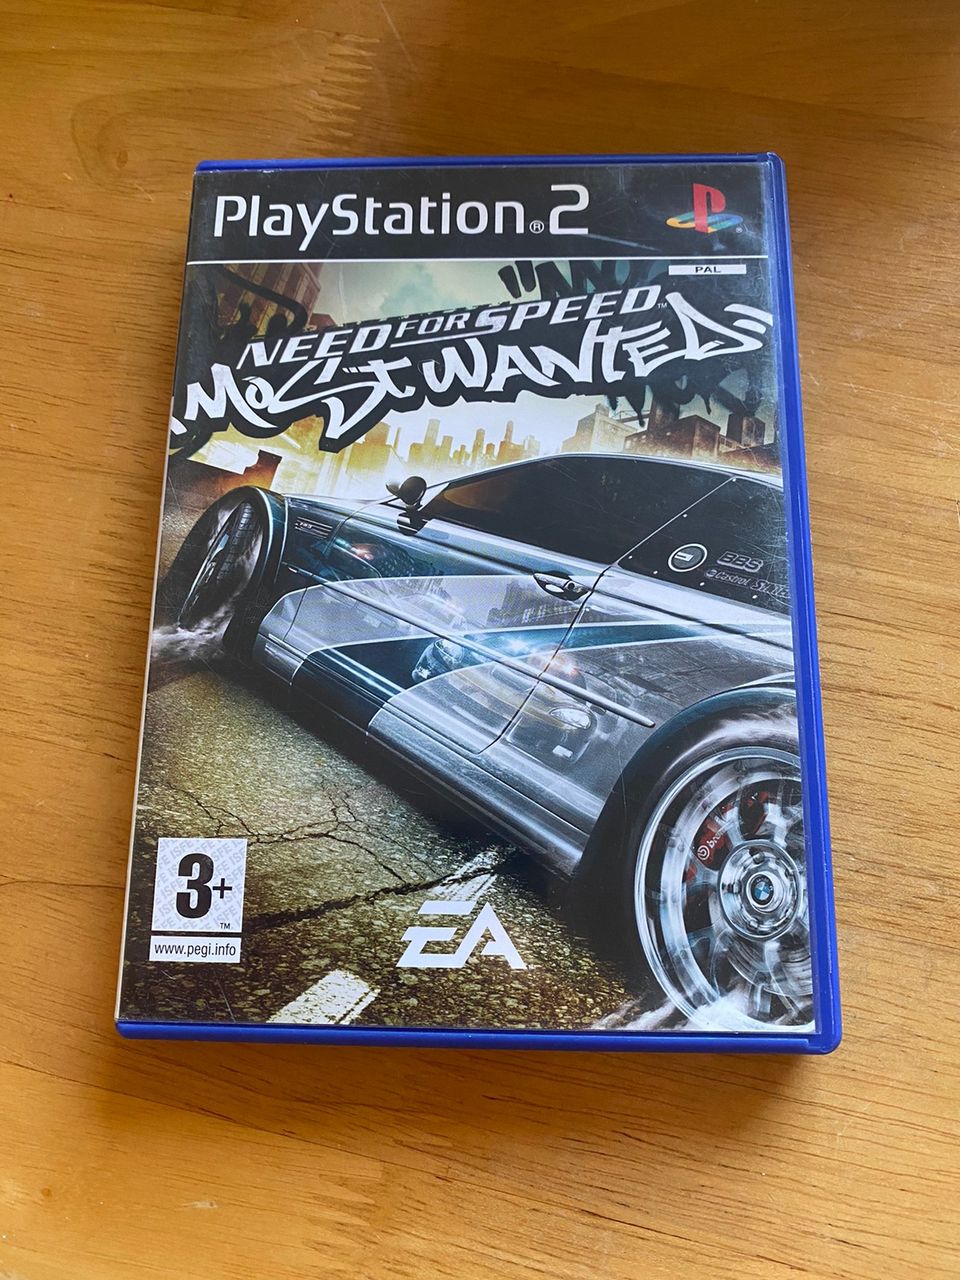 Ps2 - Need for speed most wanted